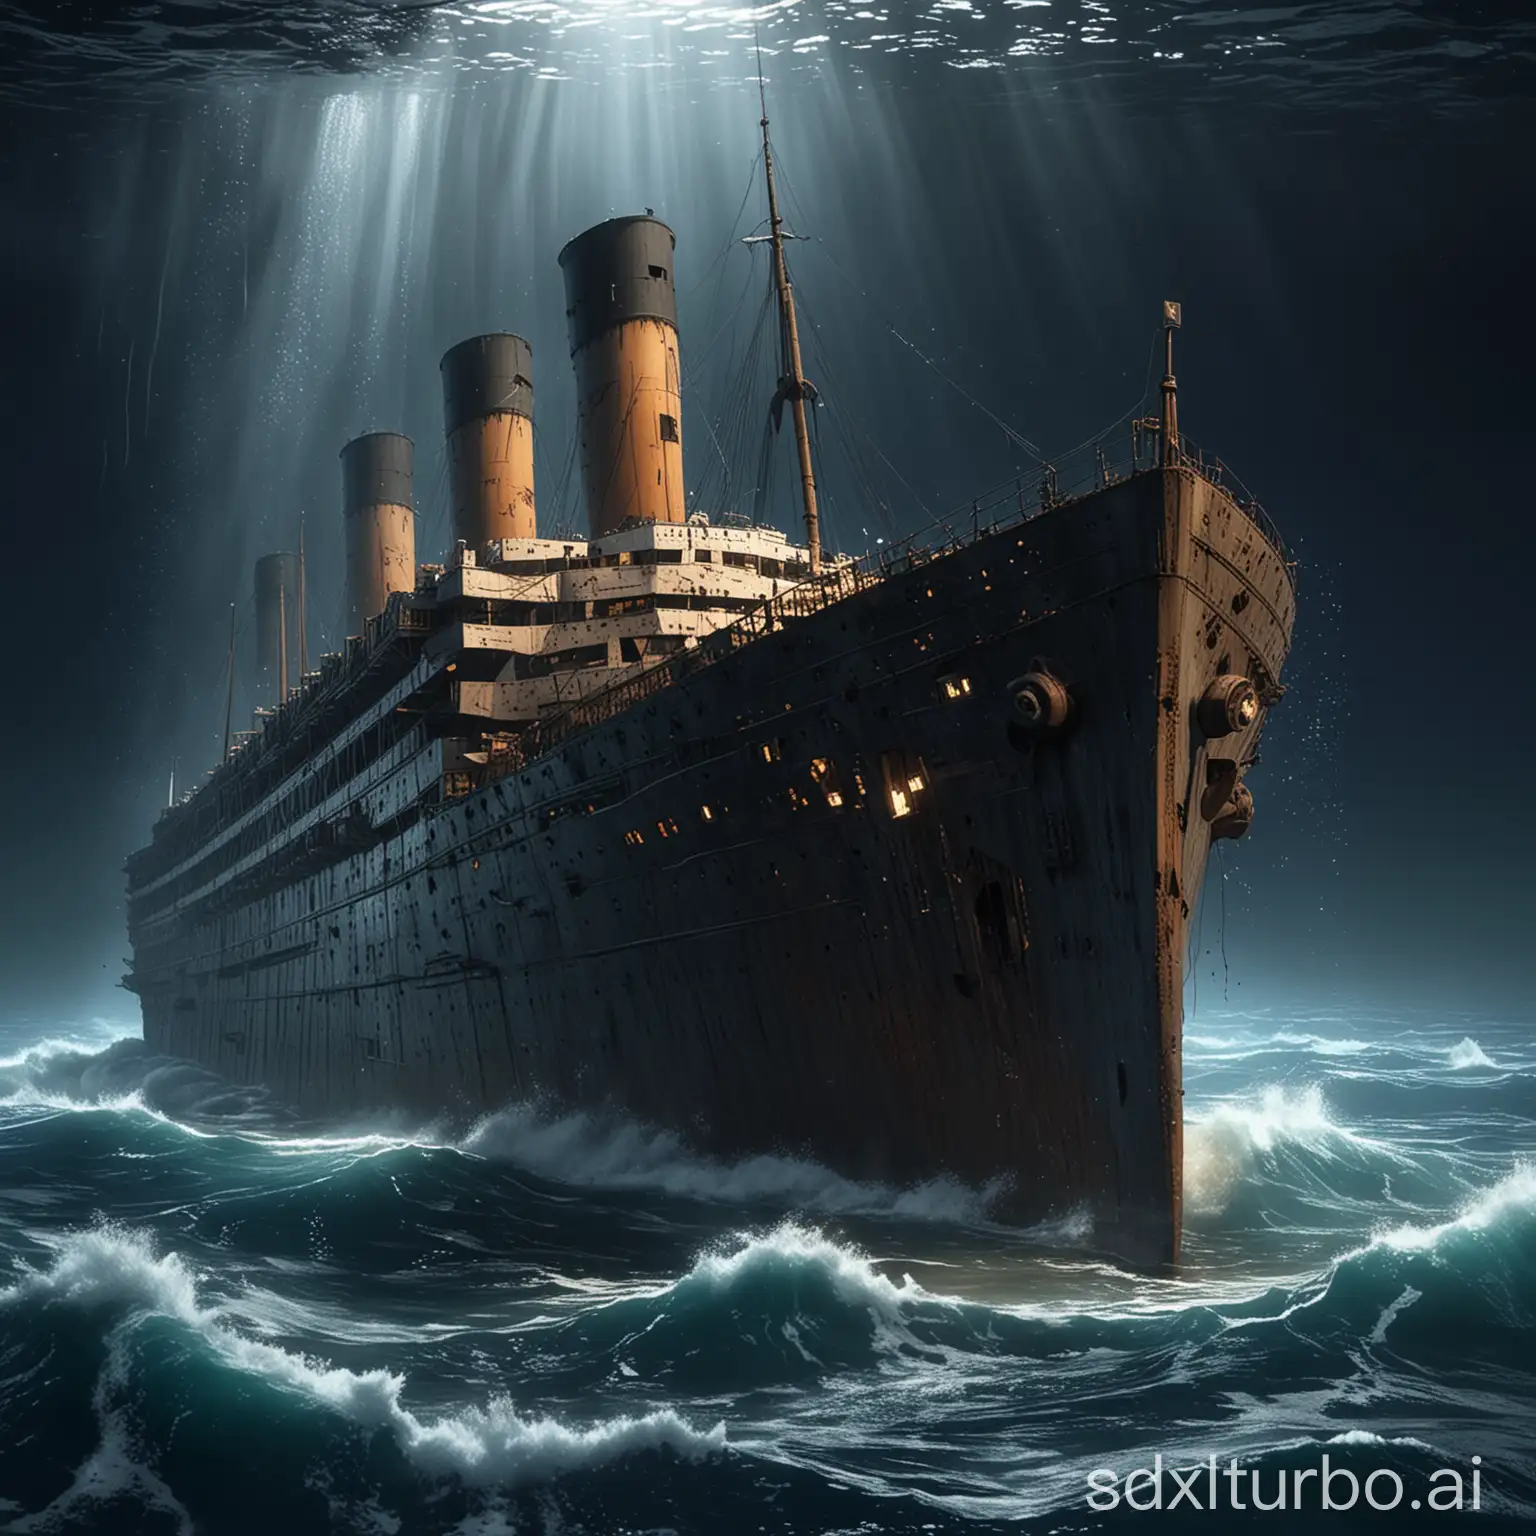 Dramatic-Scene-The-Derelict-Titanic-at-the-Bottom-of-the-Ocean